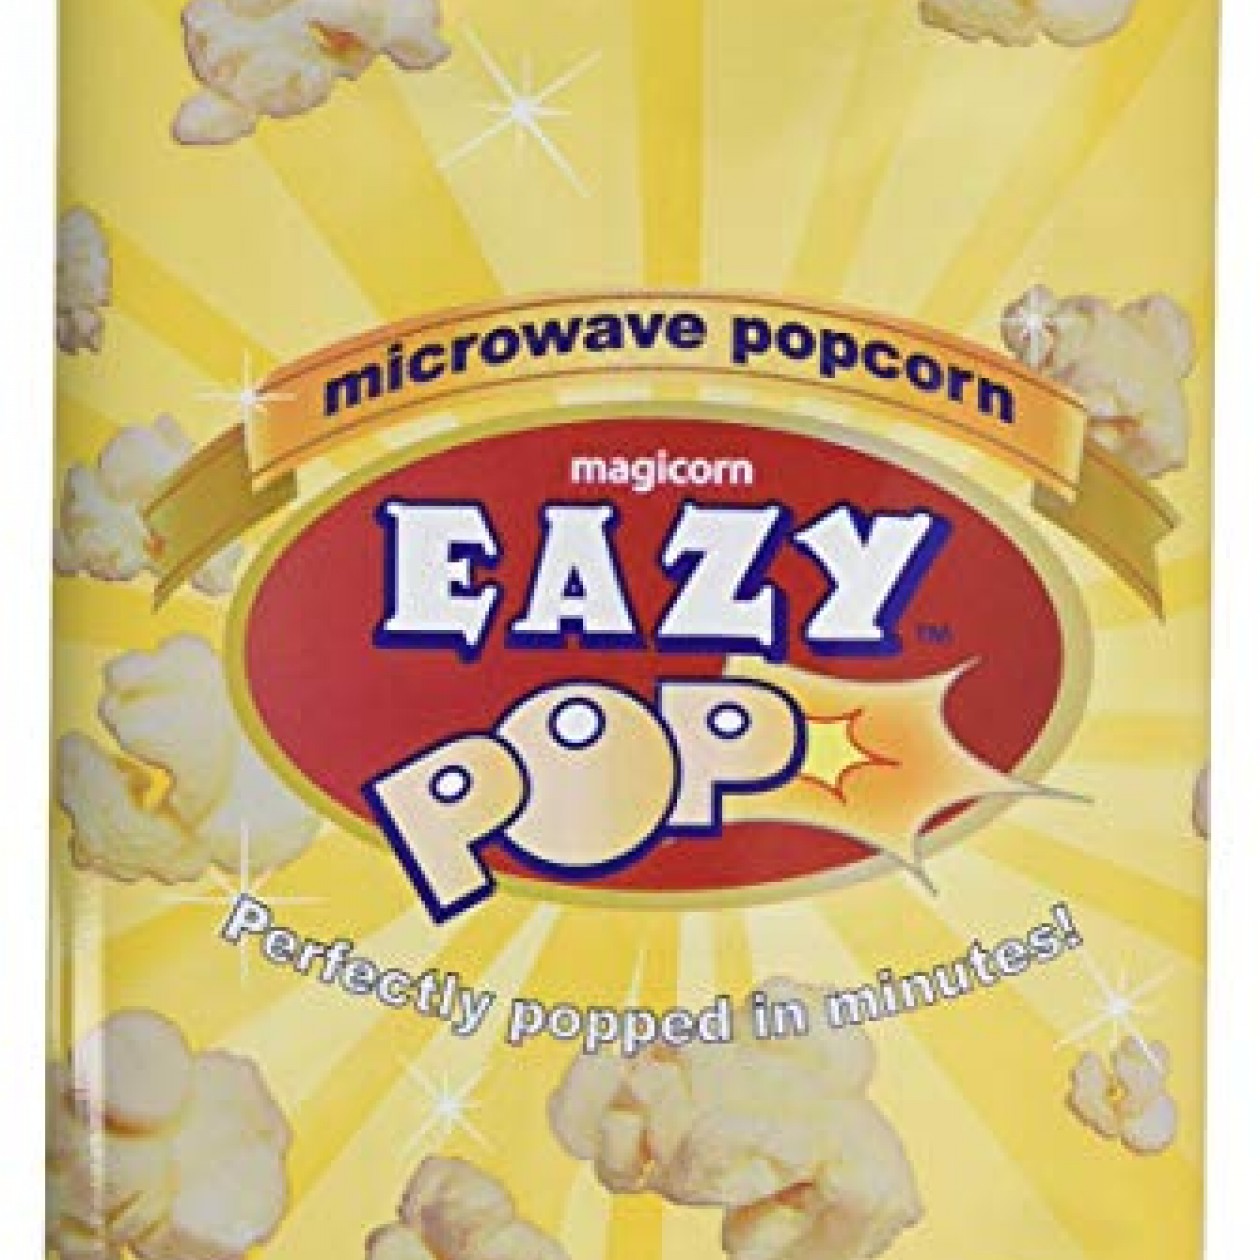 Magicorn Eazy Pop Butter Microwave Popcorn 85g (Pack of 16)